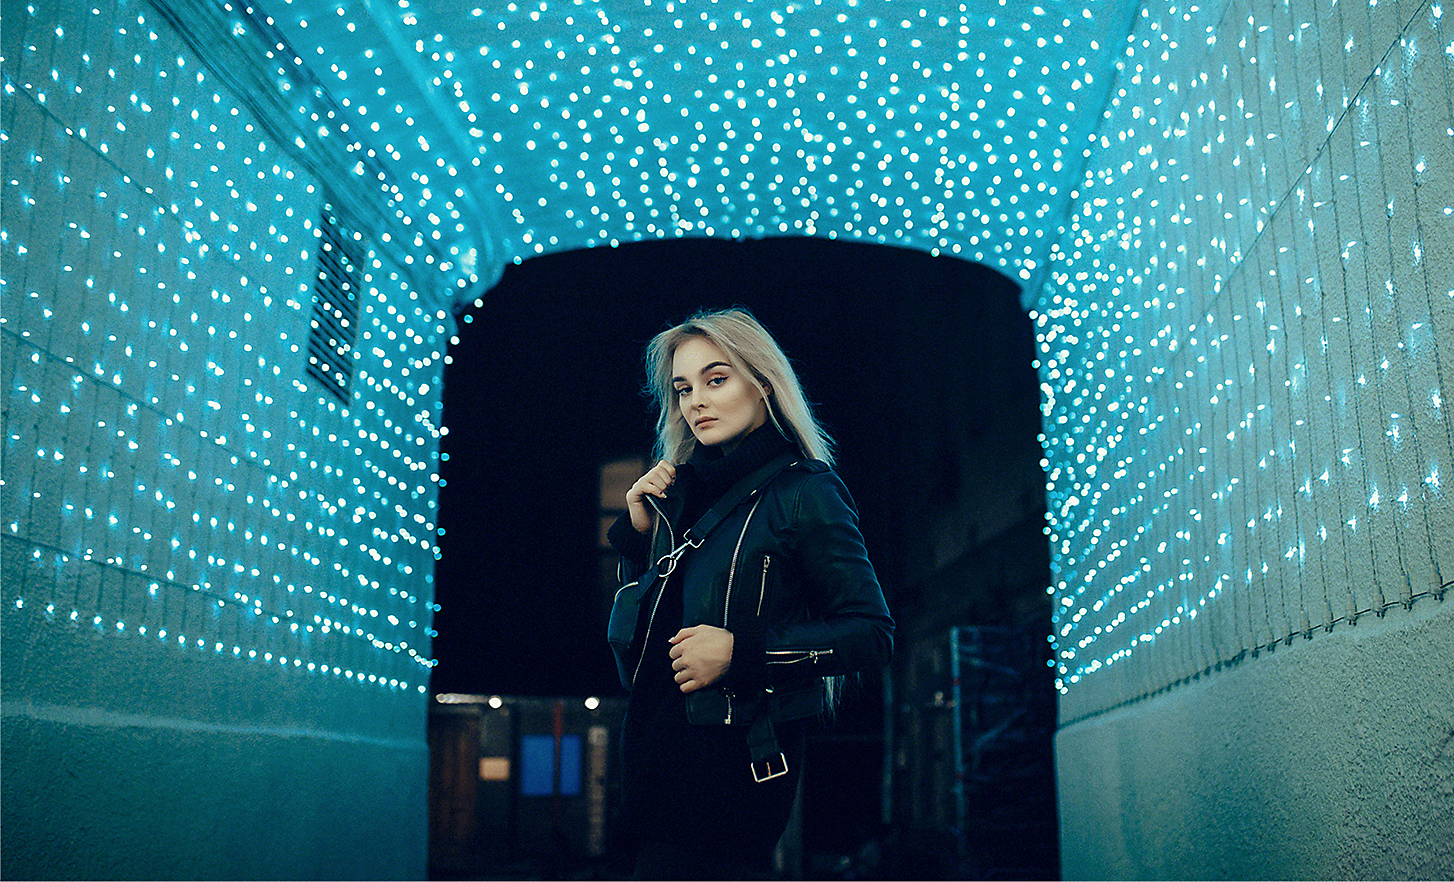 A night time portrait of a woman in a tunnel of fairy lights